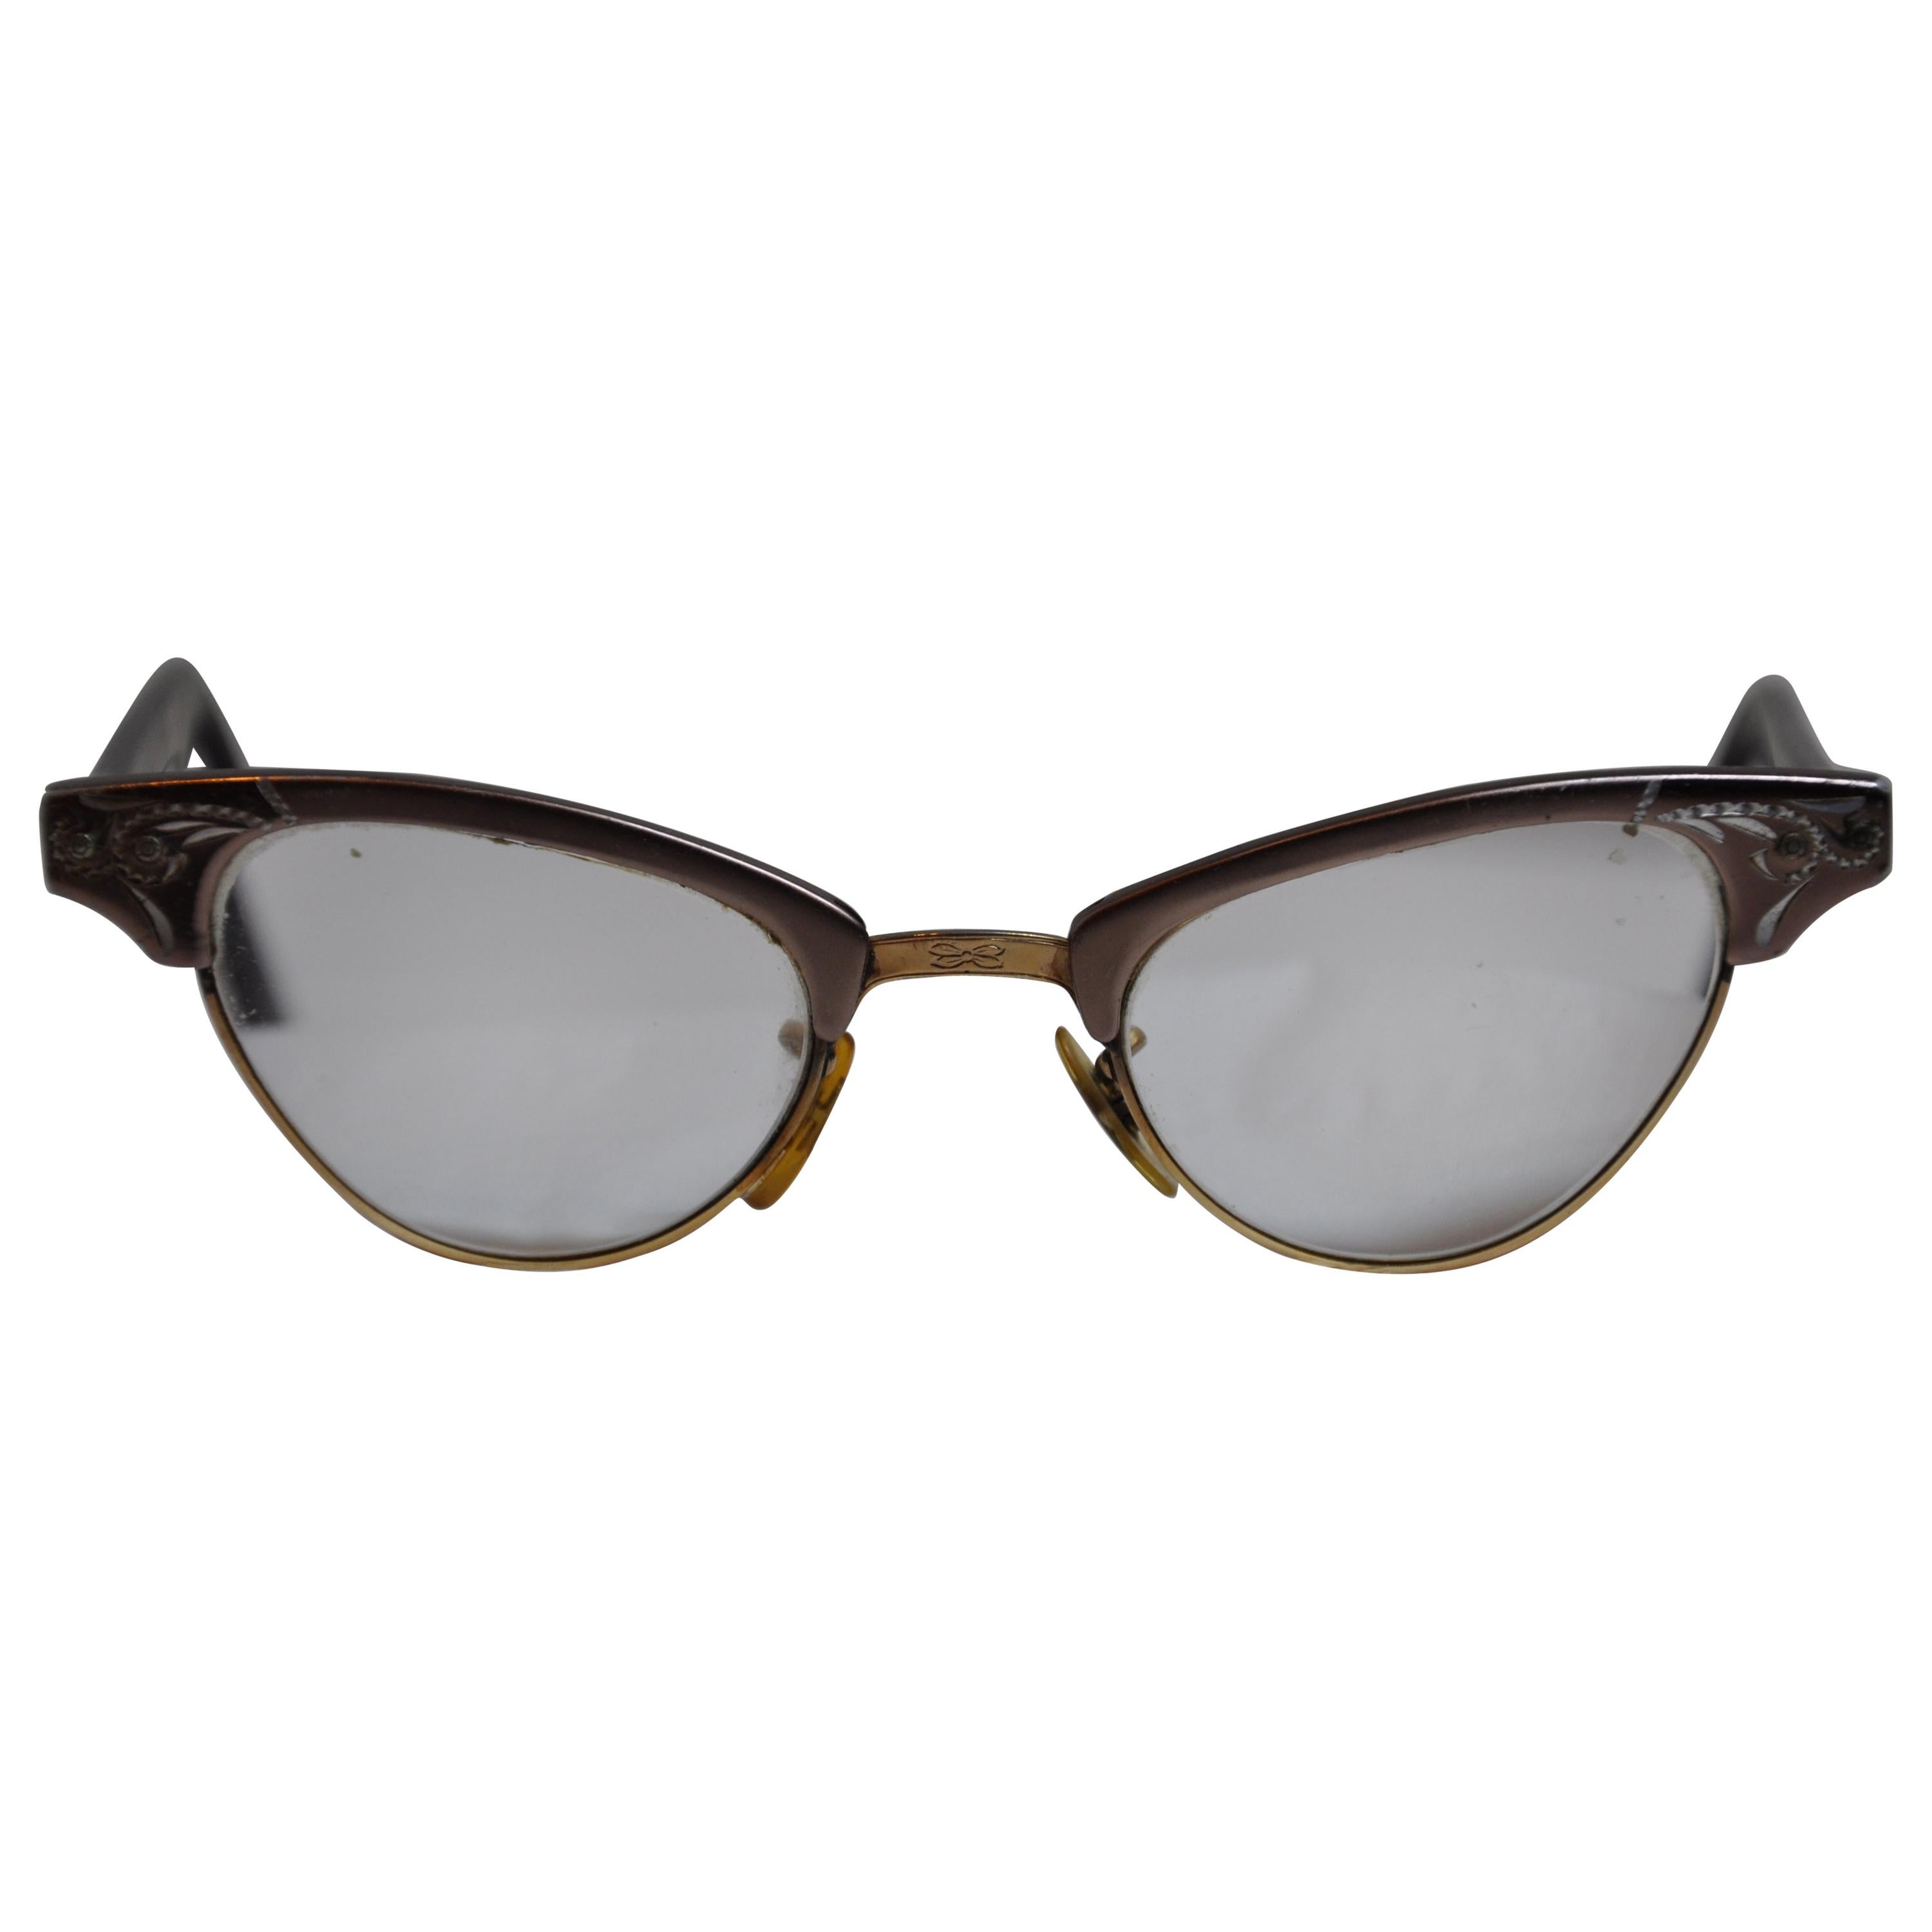 Detailed Etched 12K Gold with Warm-Brown Thick Lucite 'Cats-Eye' Glasses